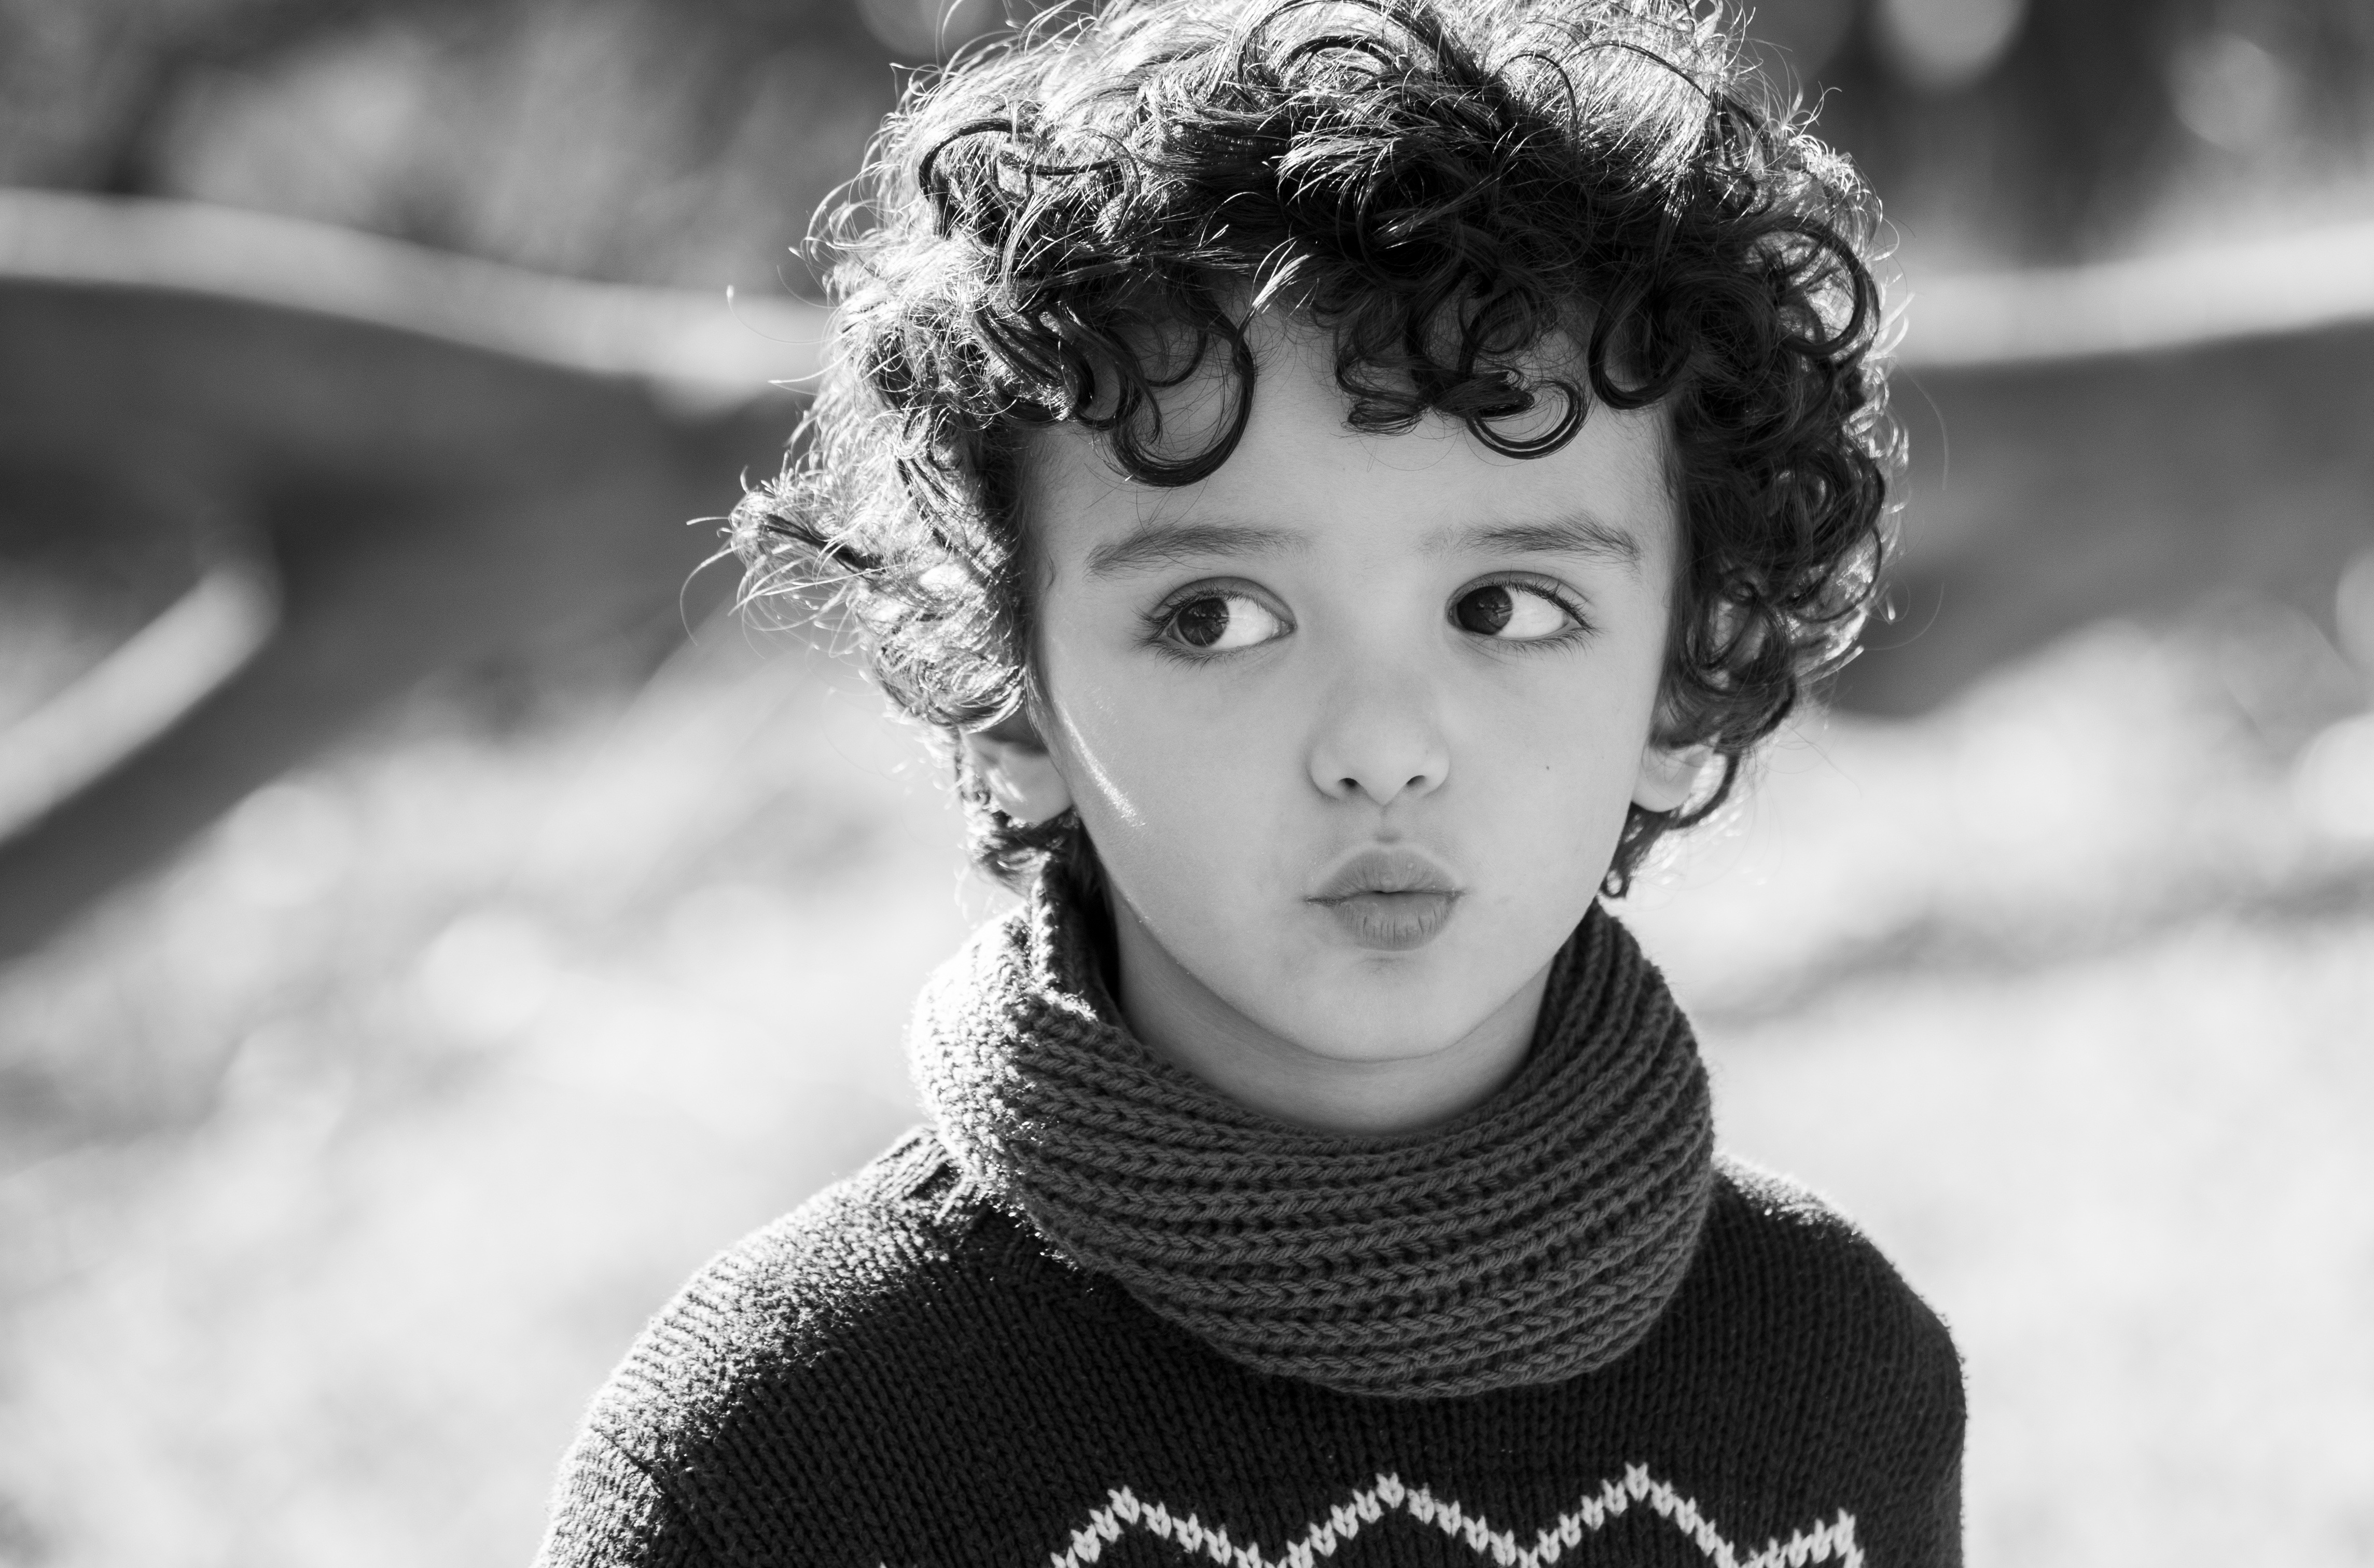 Child with curly hair